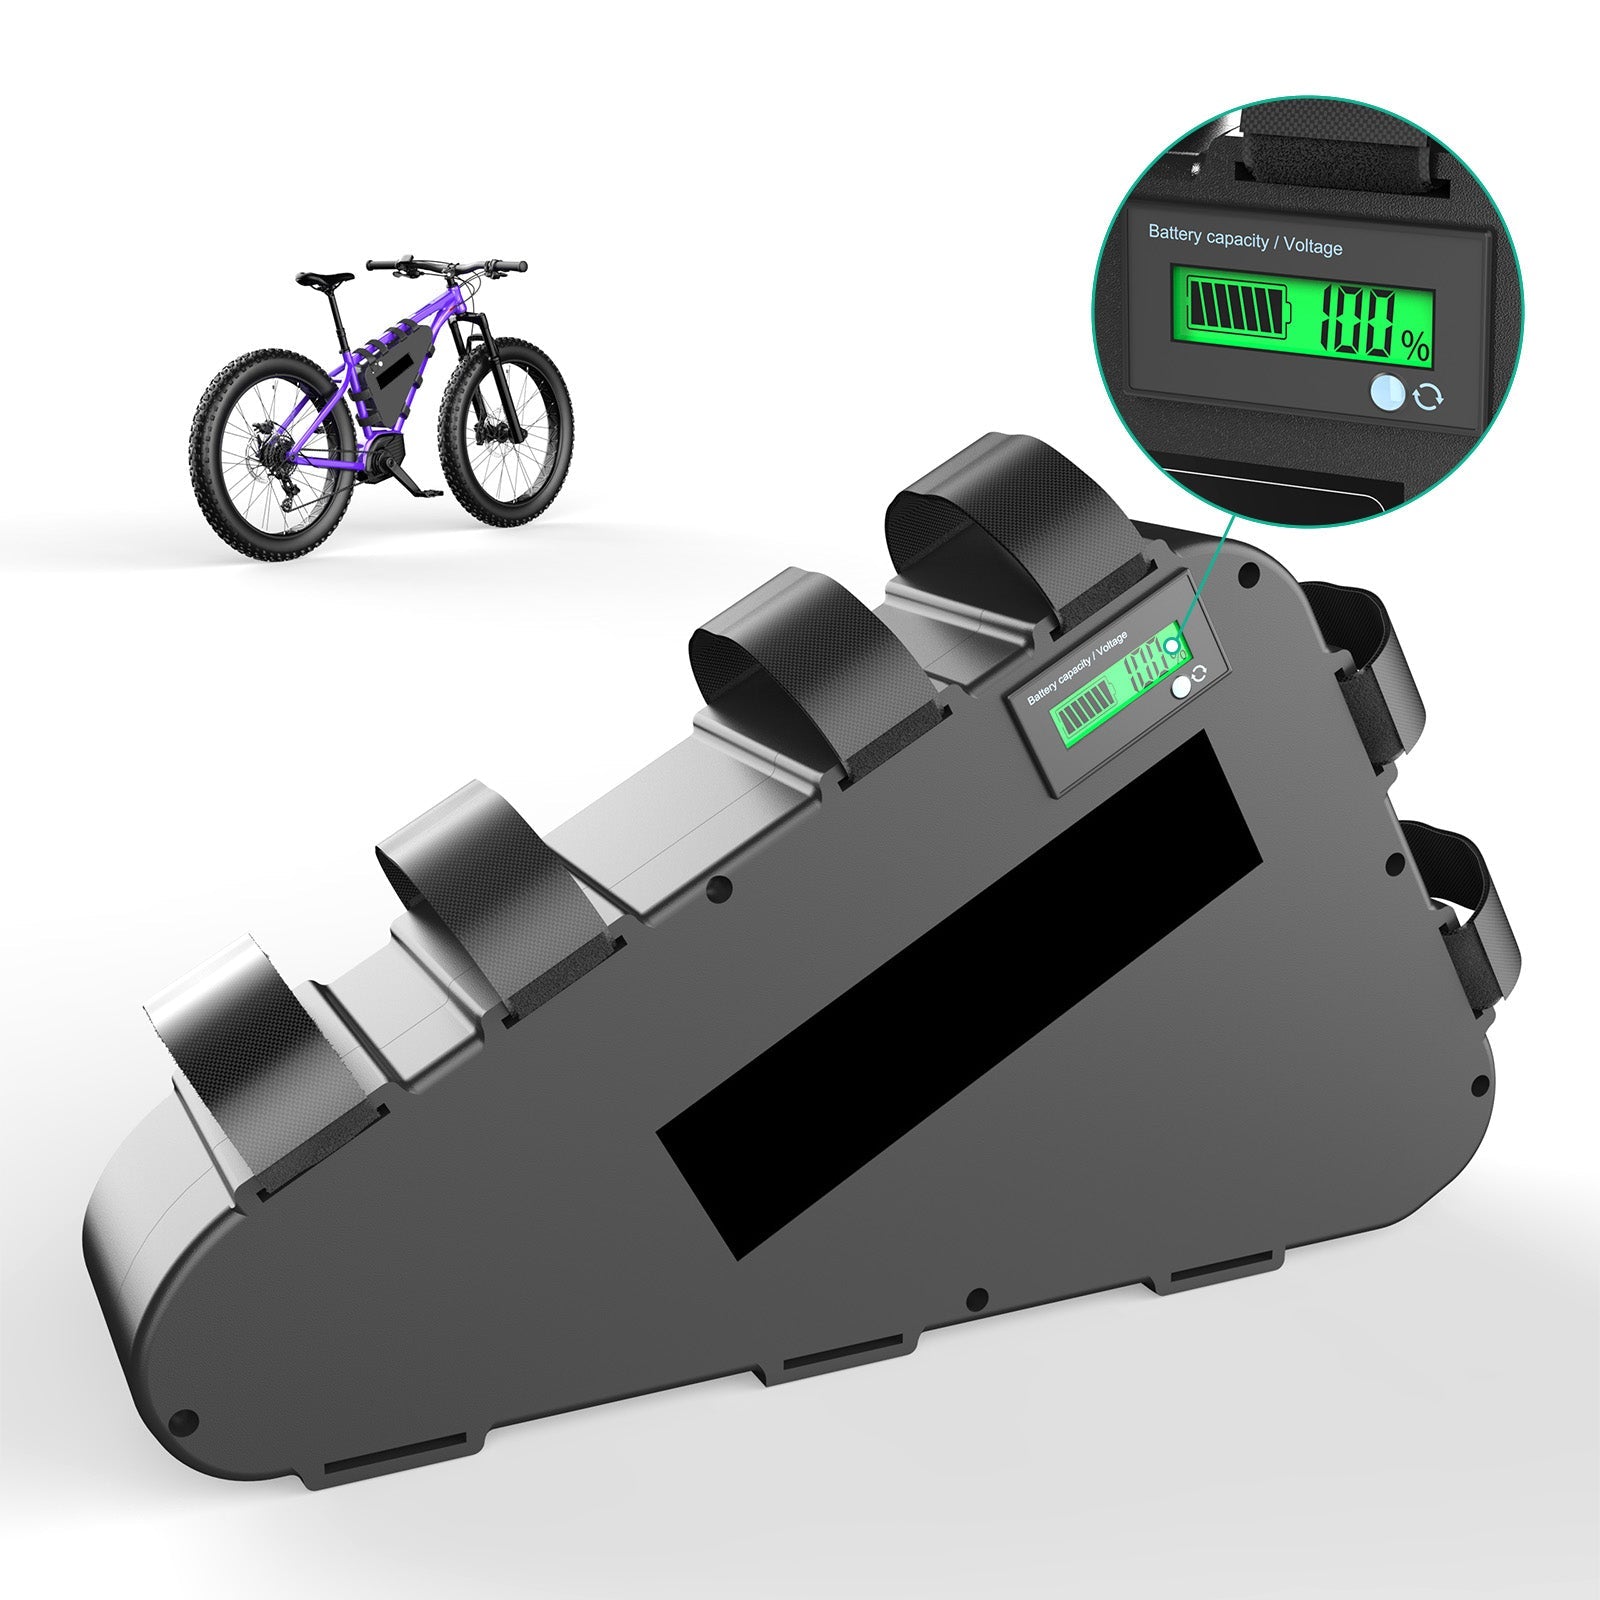 Ebike Battery 48V 28.8AH Triangle Long Range electirc Bike Lithium Battery with Charger for ebike, scooter 0-1800W Motor